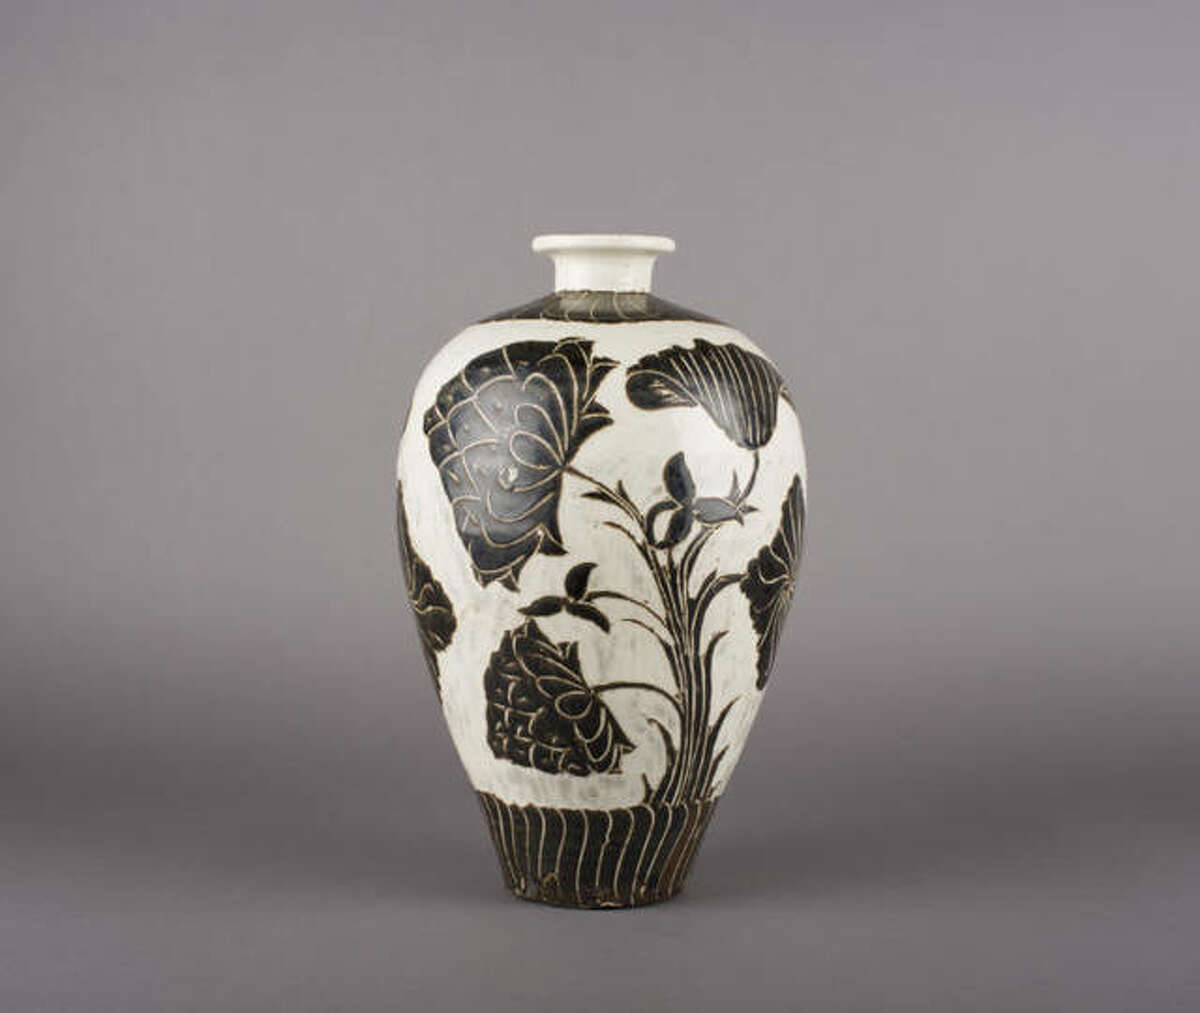 “Prunus Vase (meiping) with Design of Lotus Blossoms and Leaves”, 11th-early 12th century; Chinese, Northern Song dynasty; Cizhou ware; stoneware with white slip and black glaze with sgraffiato decoration; 12 5/16 inches; Saint Louis Art Museum, Bequest of Samuel C. Davis 949:1940